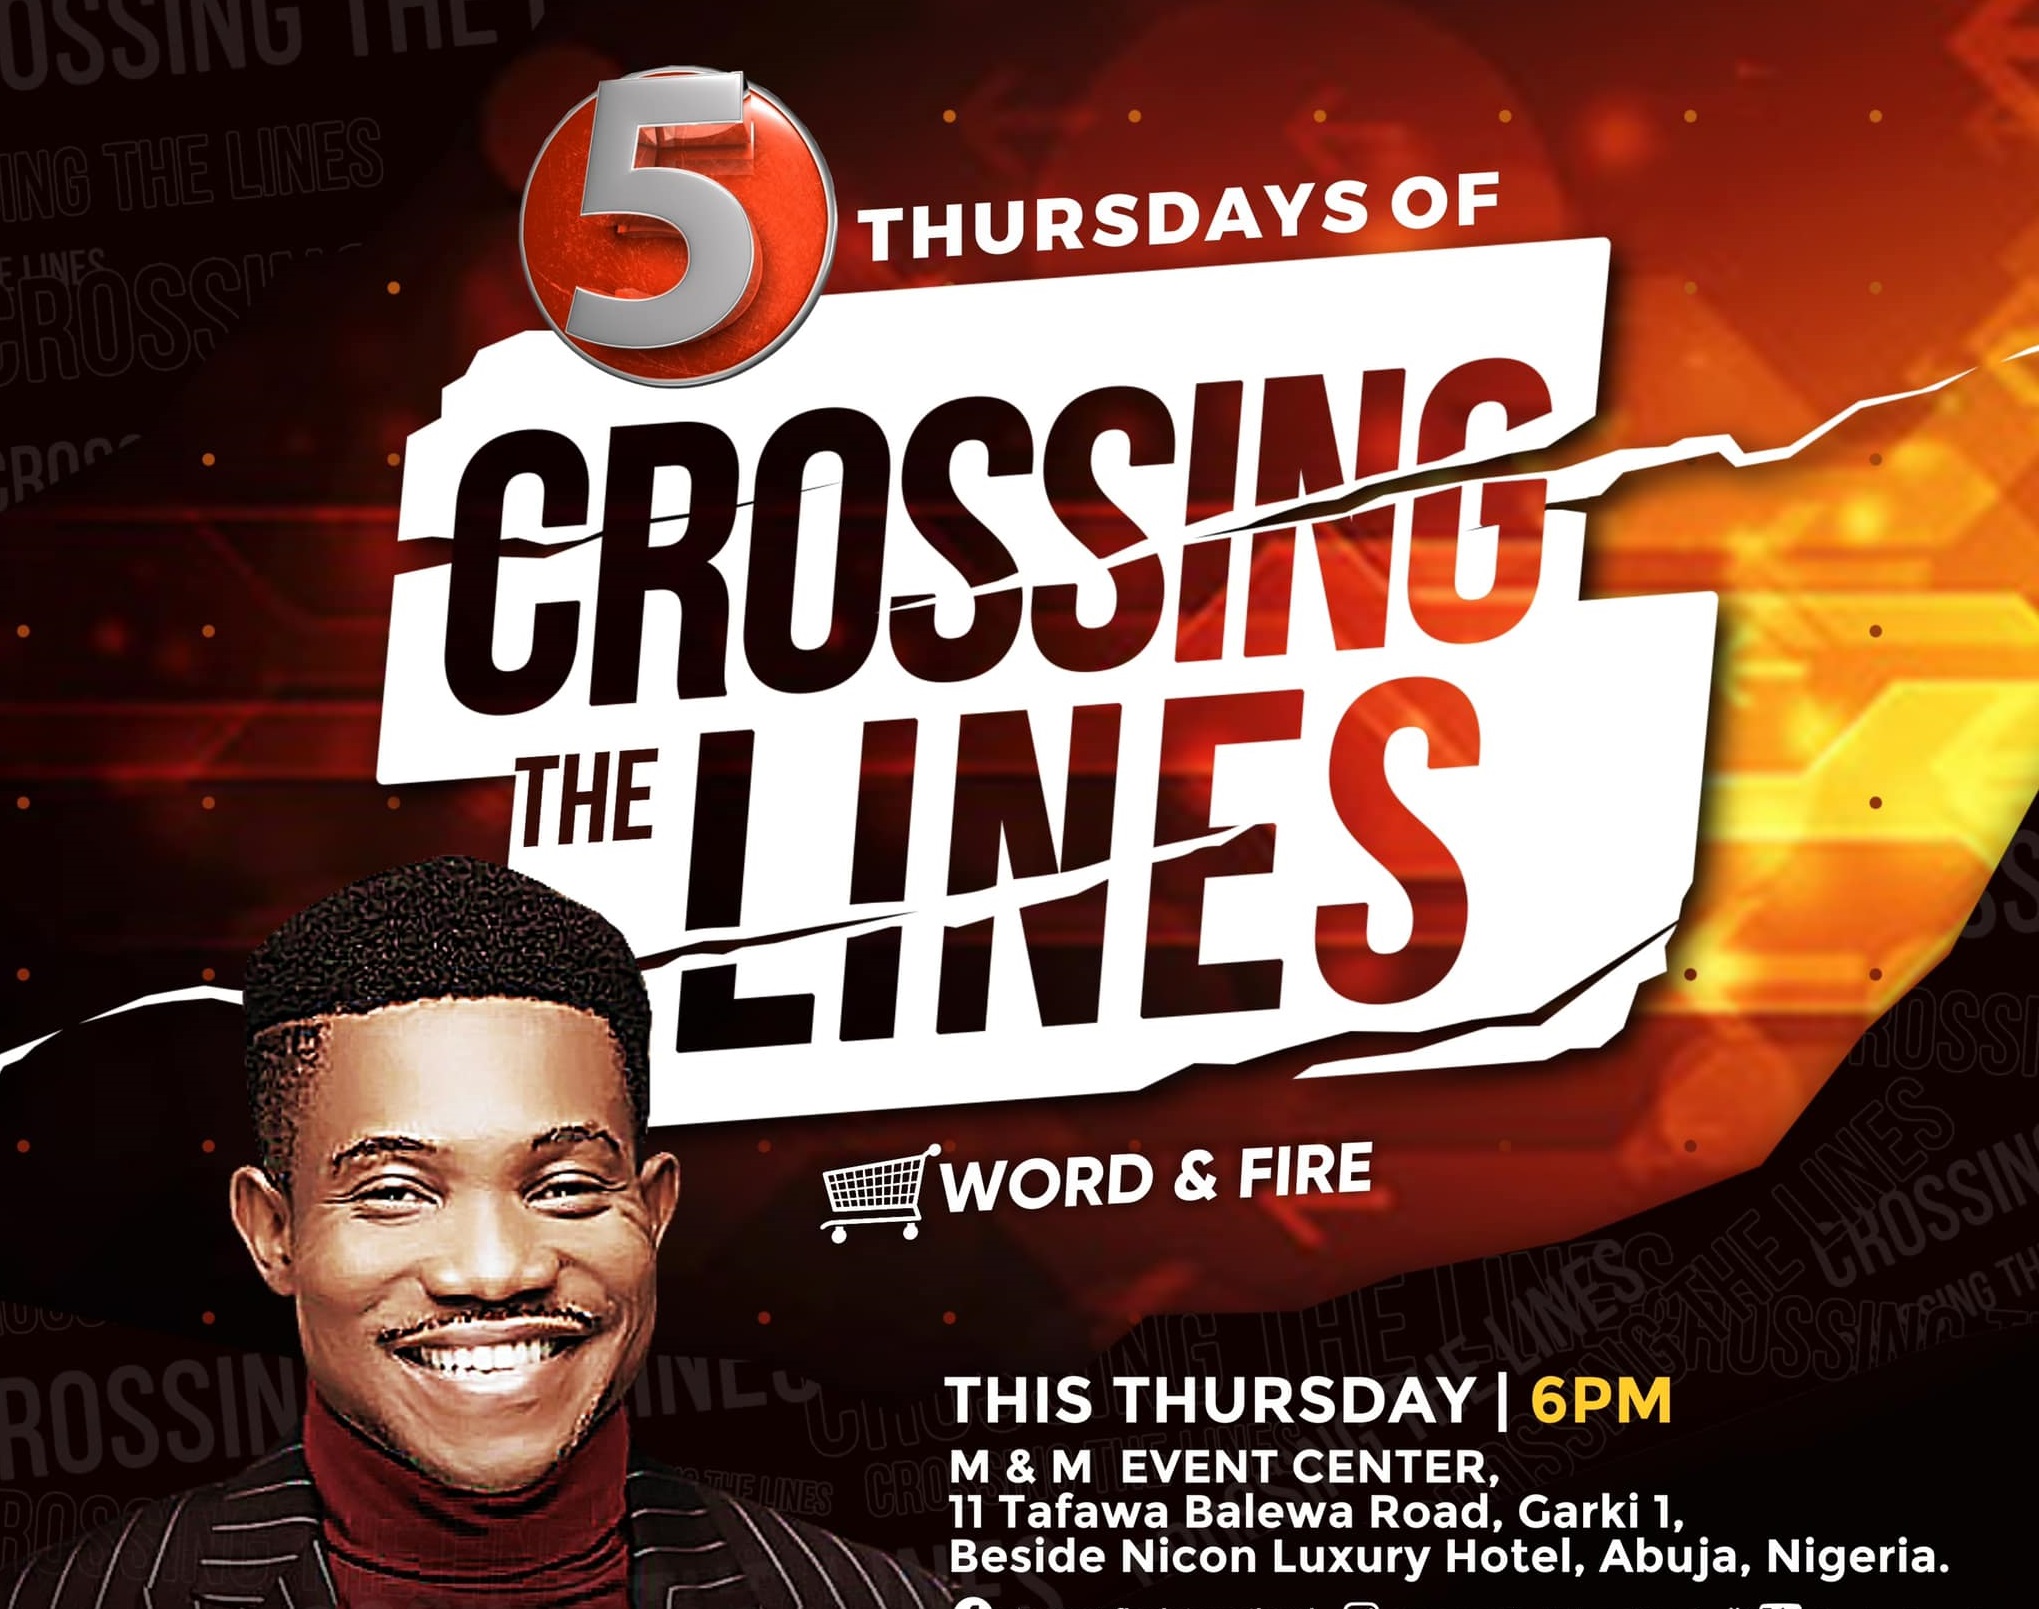 Streams of Joy Live Service 8 September 2022 For Midweek 5 Thursday of Crossing the Line